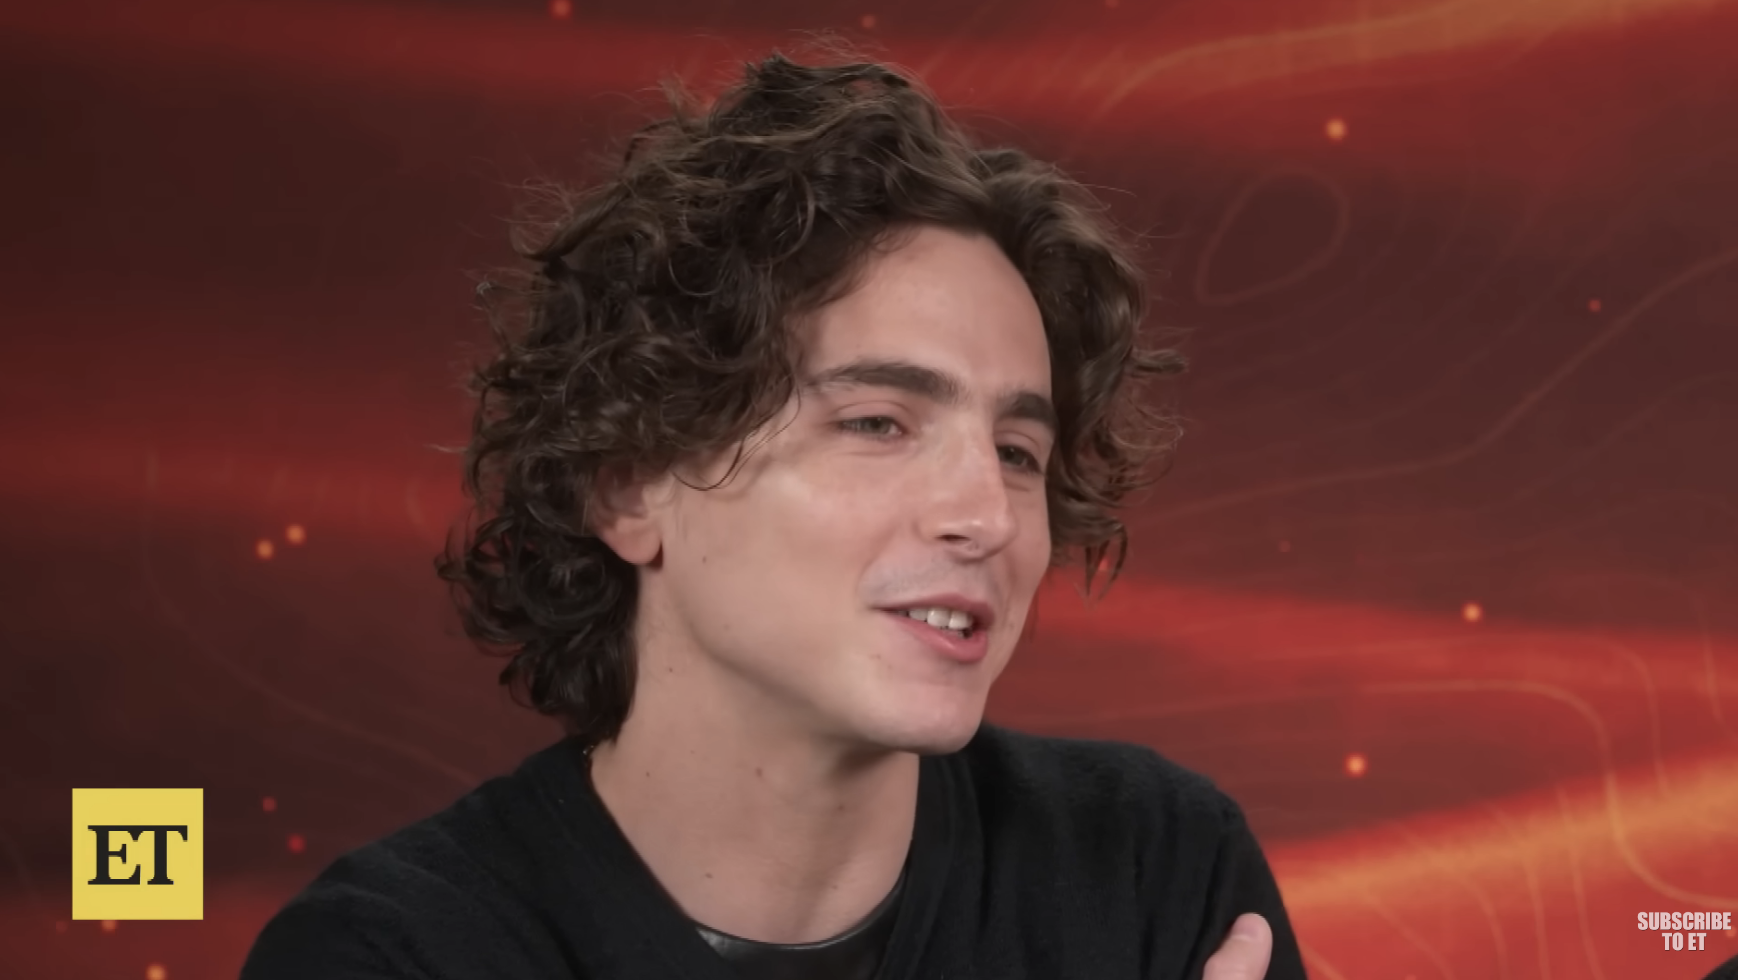 Timothée Chalamet in a casual interview, smiling, with a blurred background